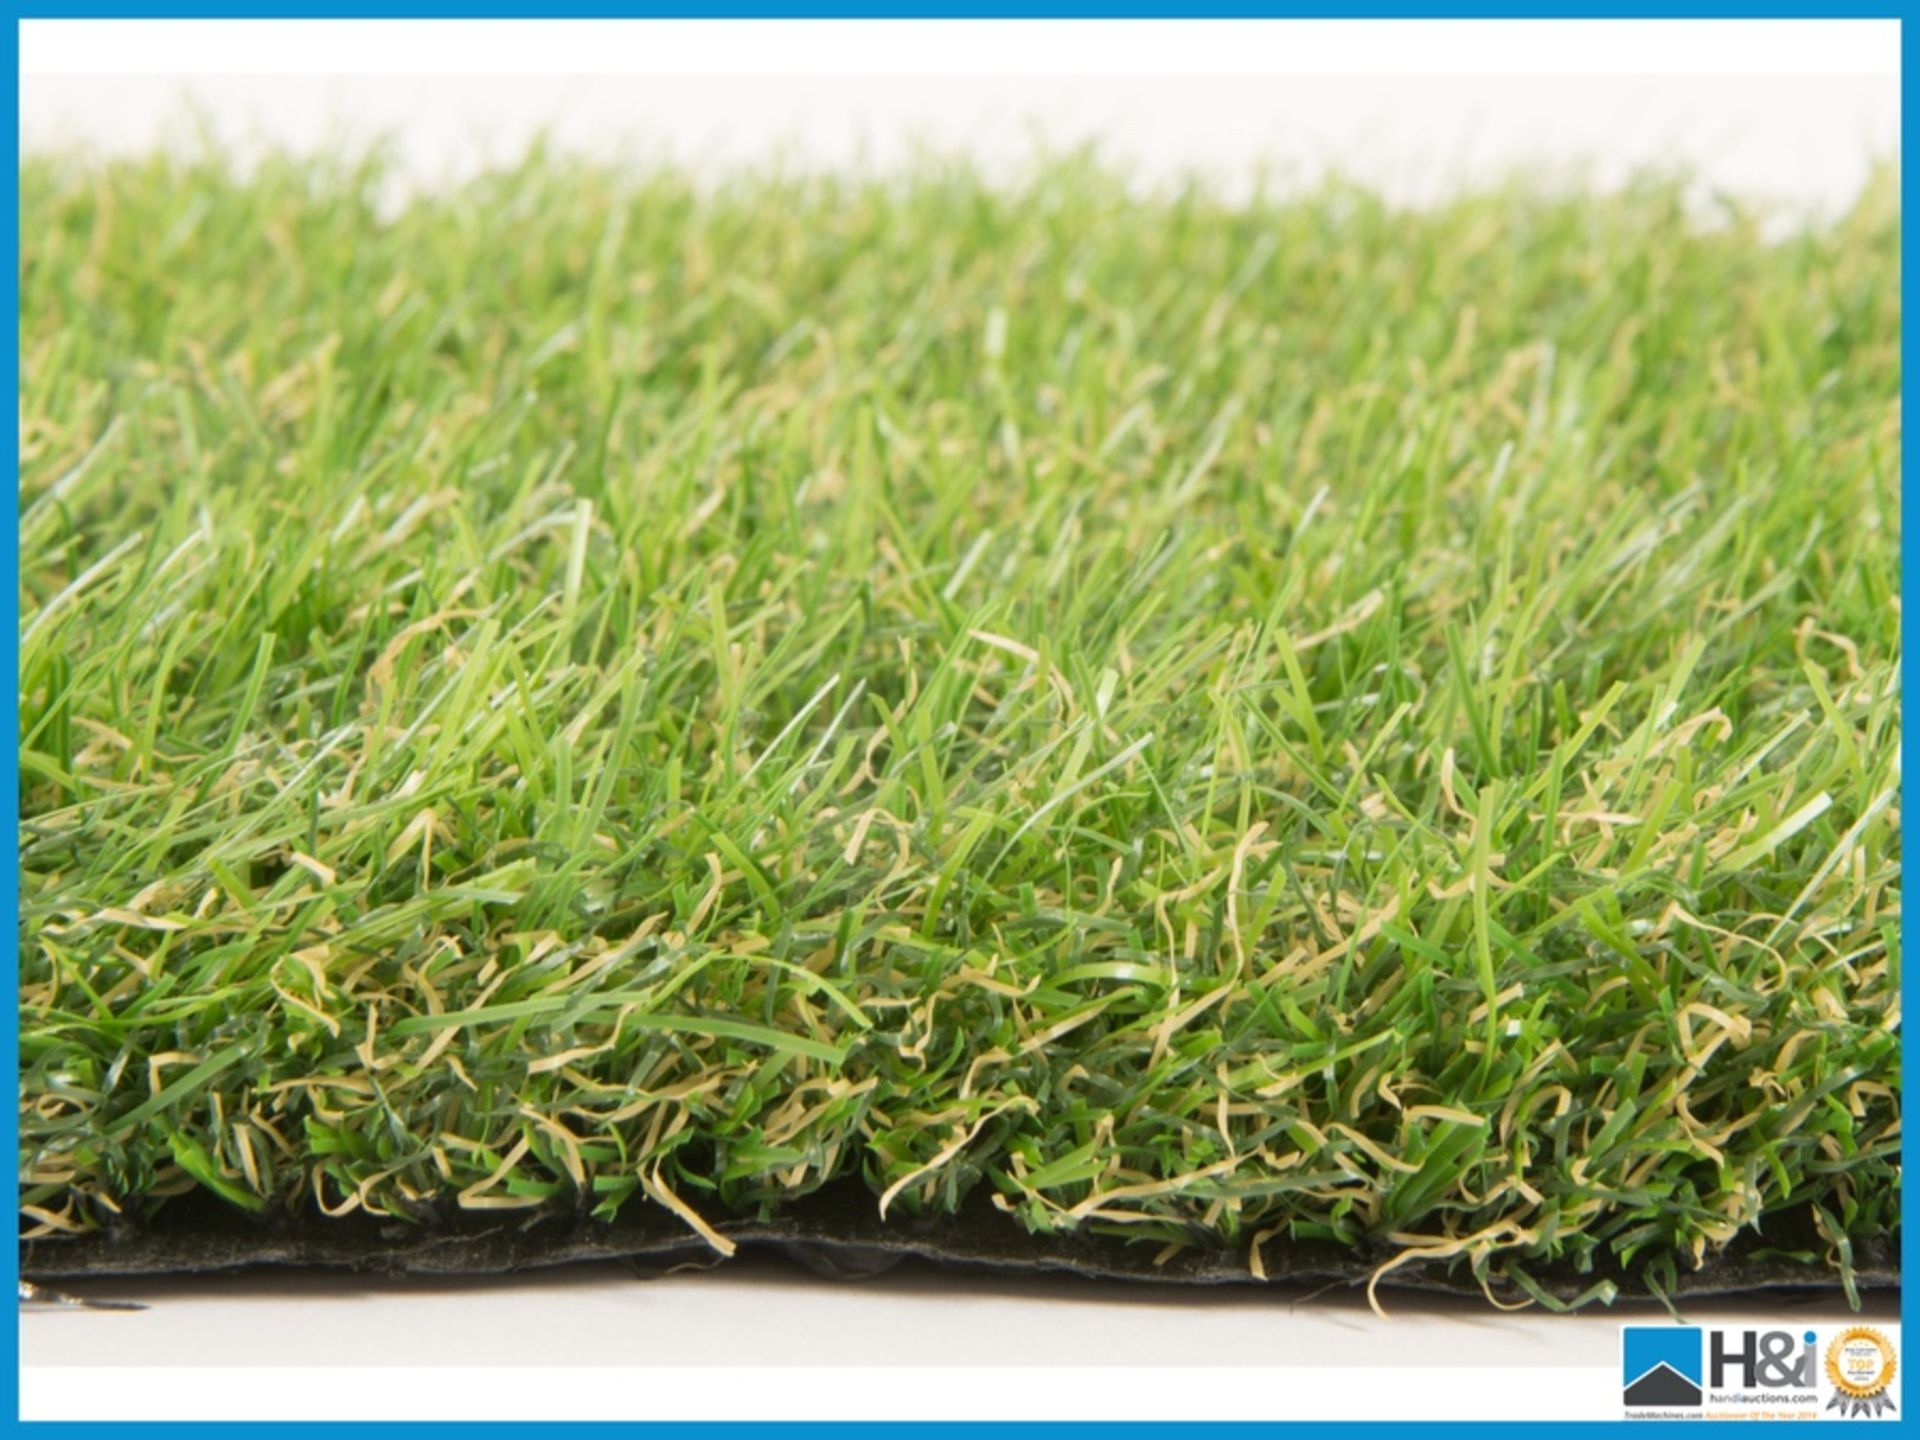 Ultra high-quality 'County' artificial grass. Useage applications, commercial and domestic, - Image 2 of 4